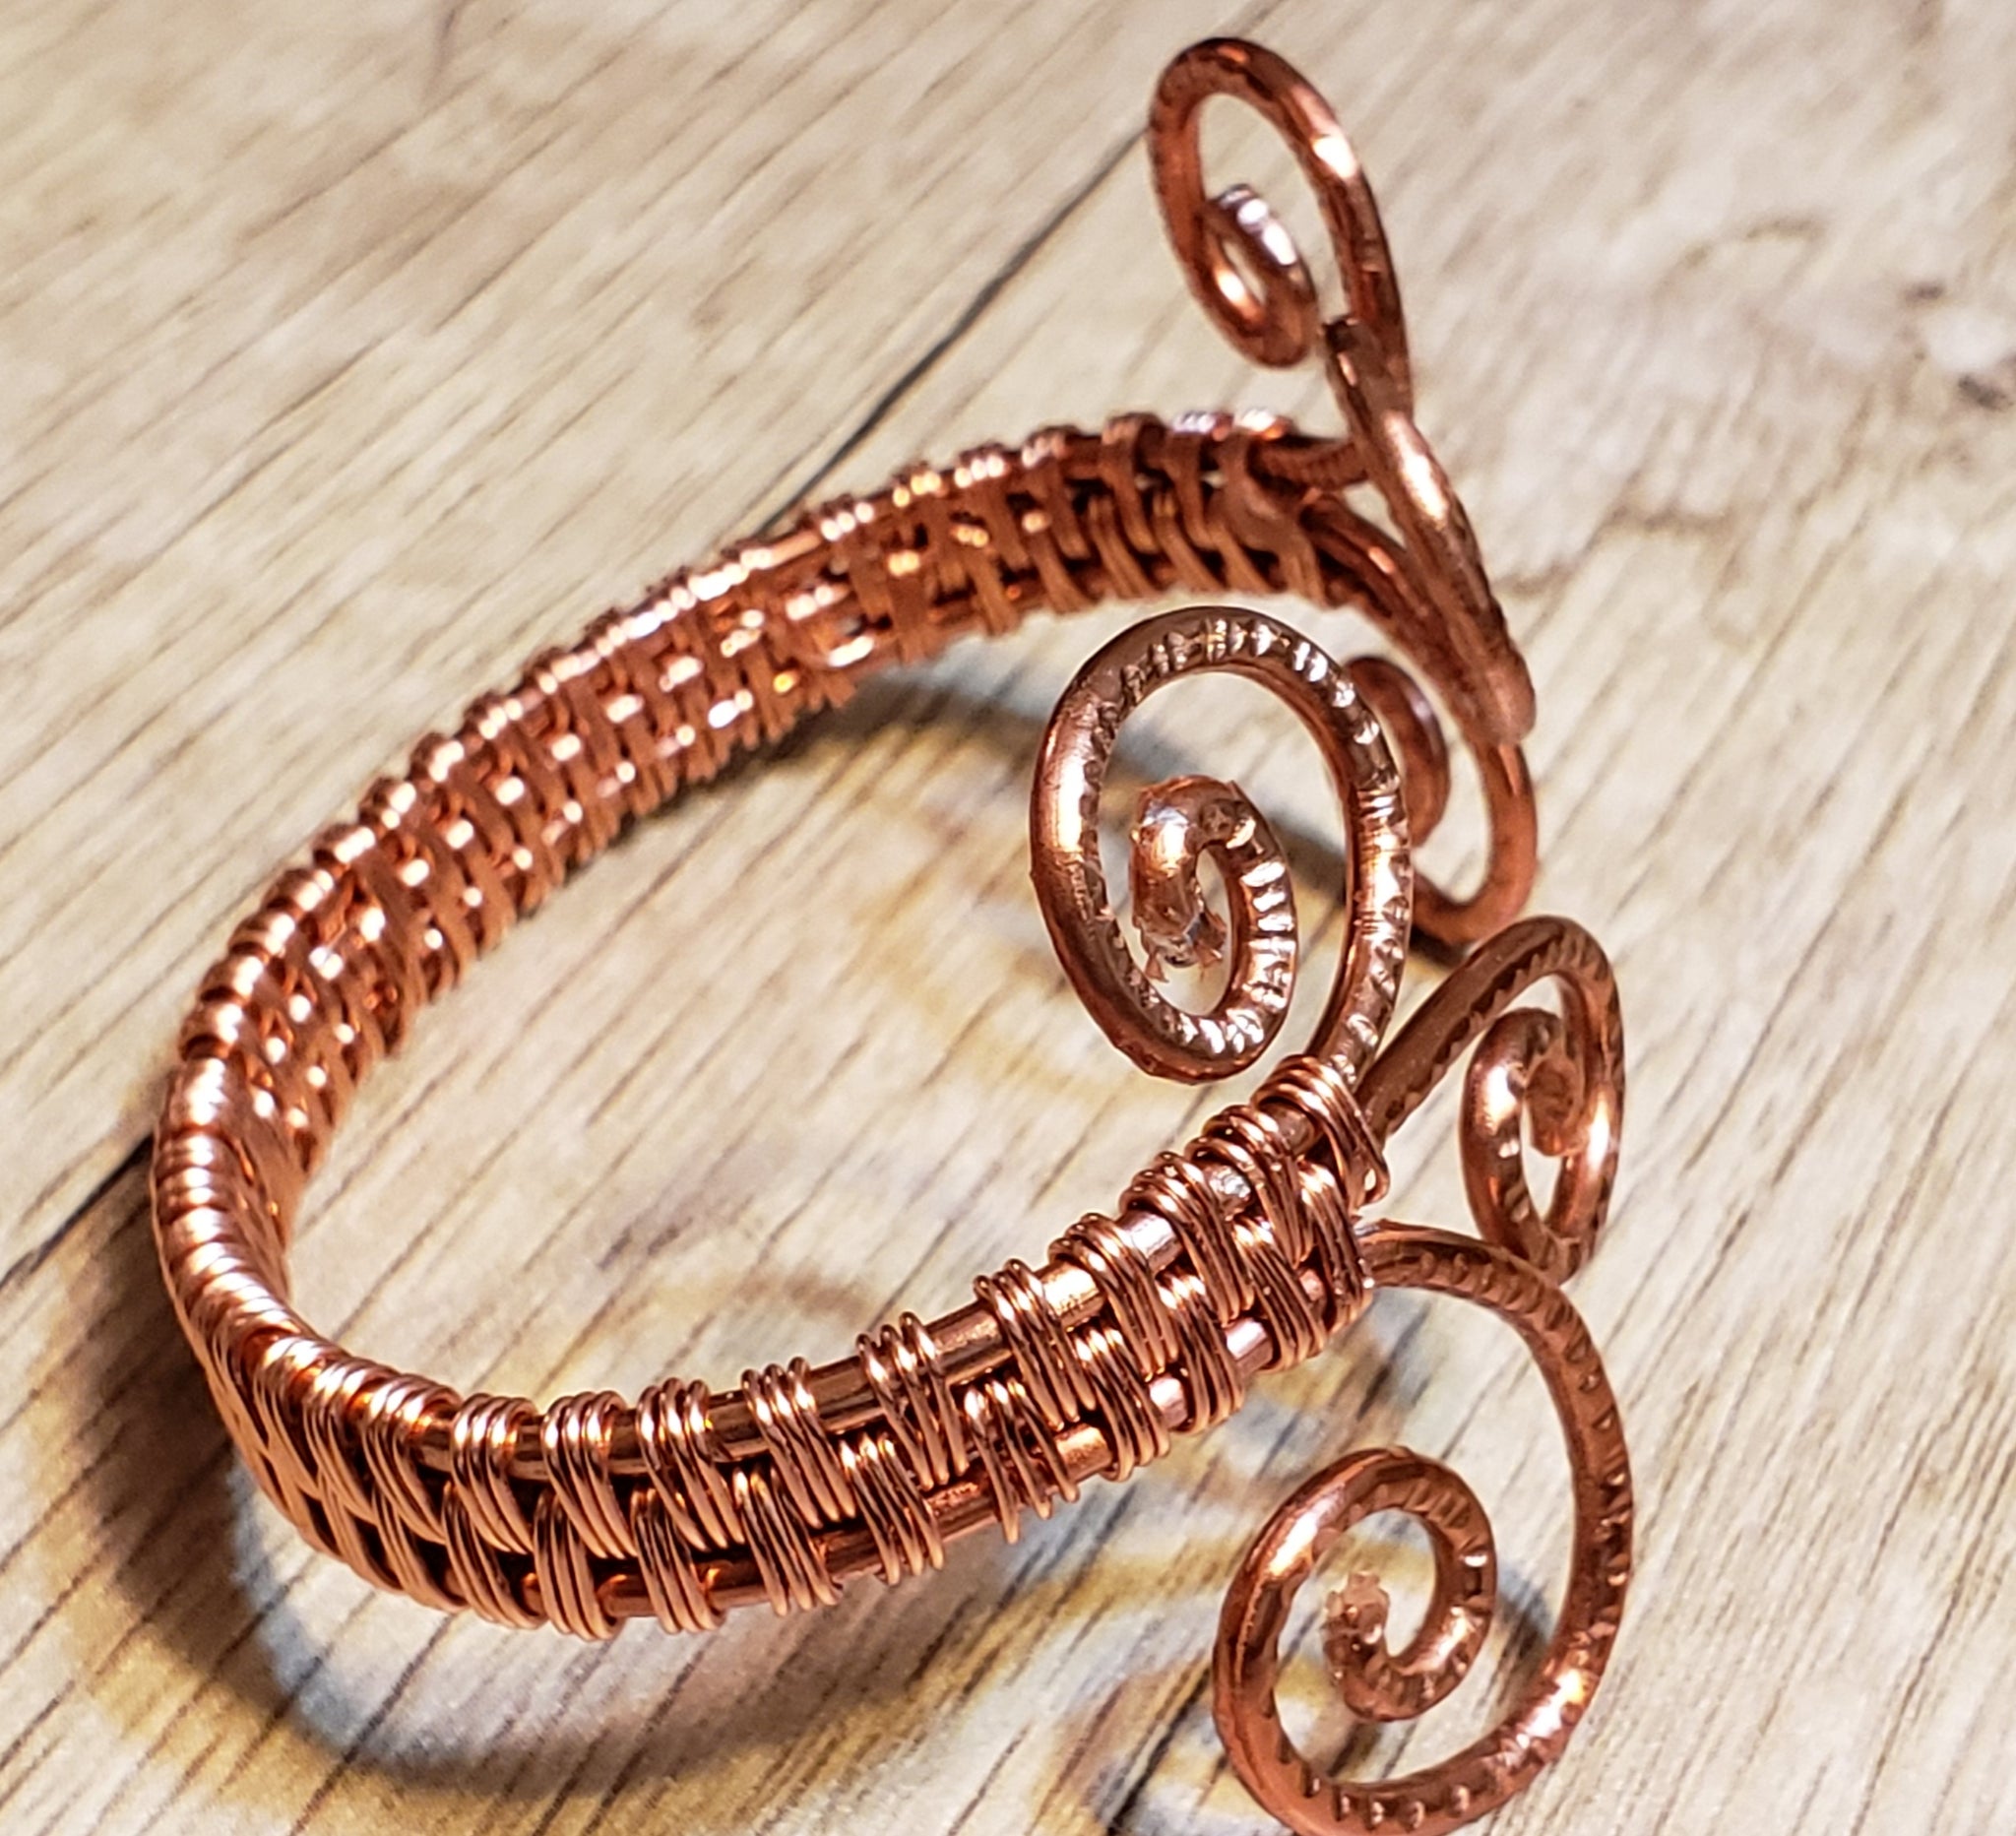 Wire Wrapped Bracelet Unique Copper Bangle Bracelet Antique Style Handcrafted Wire Weave Jewelry 7th Anniversary Gift 19 cm | WireWrapArt